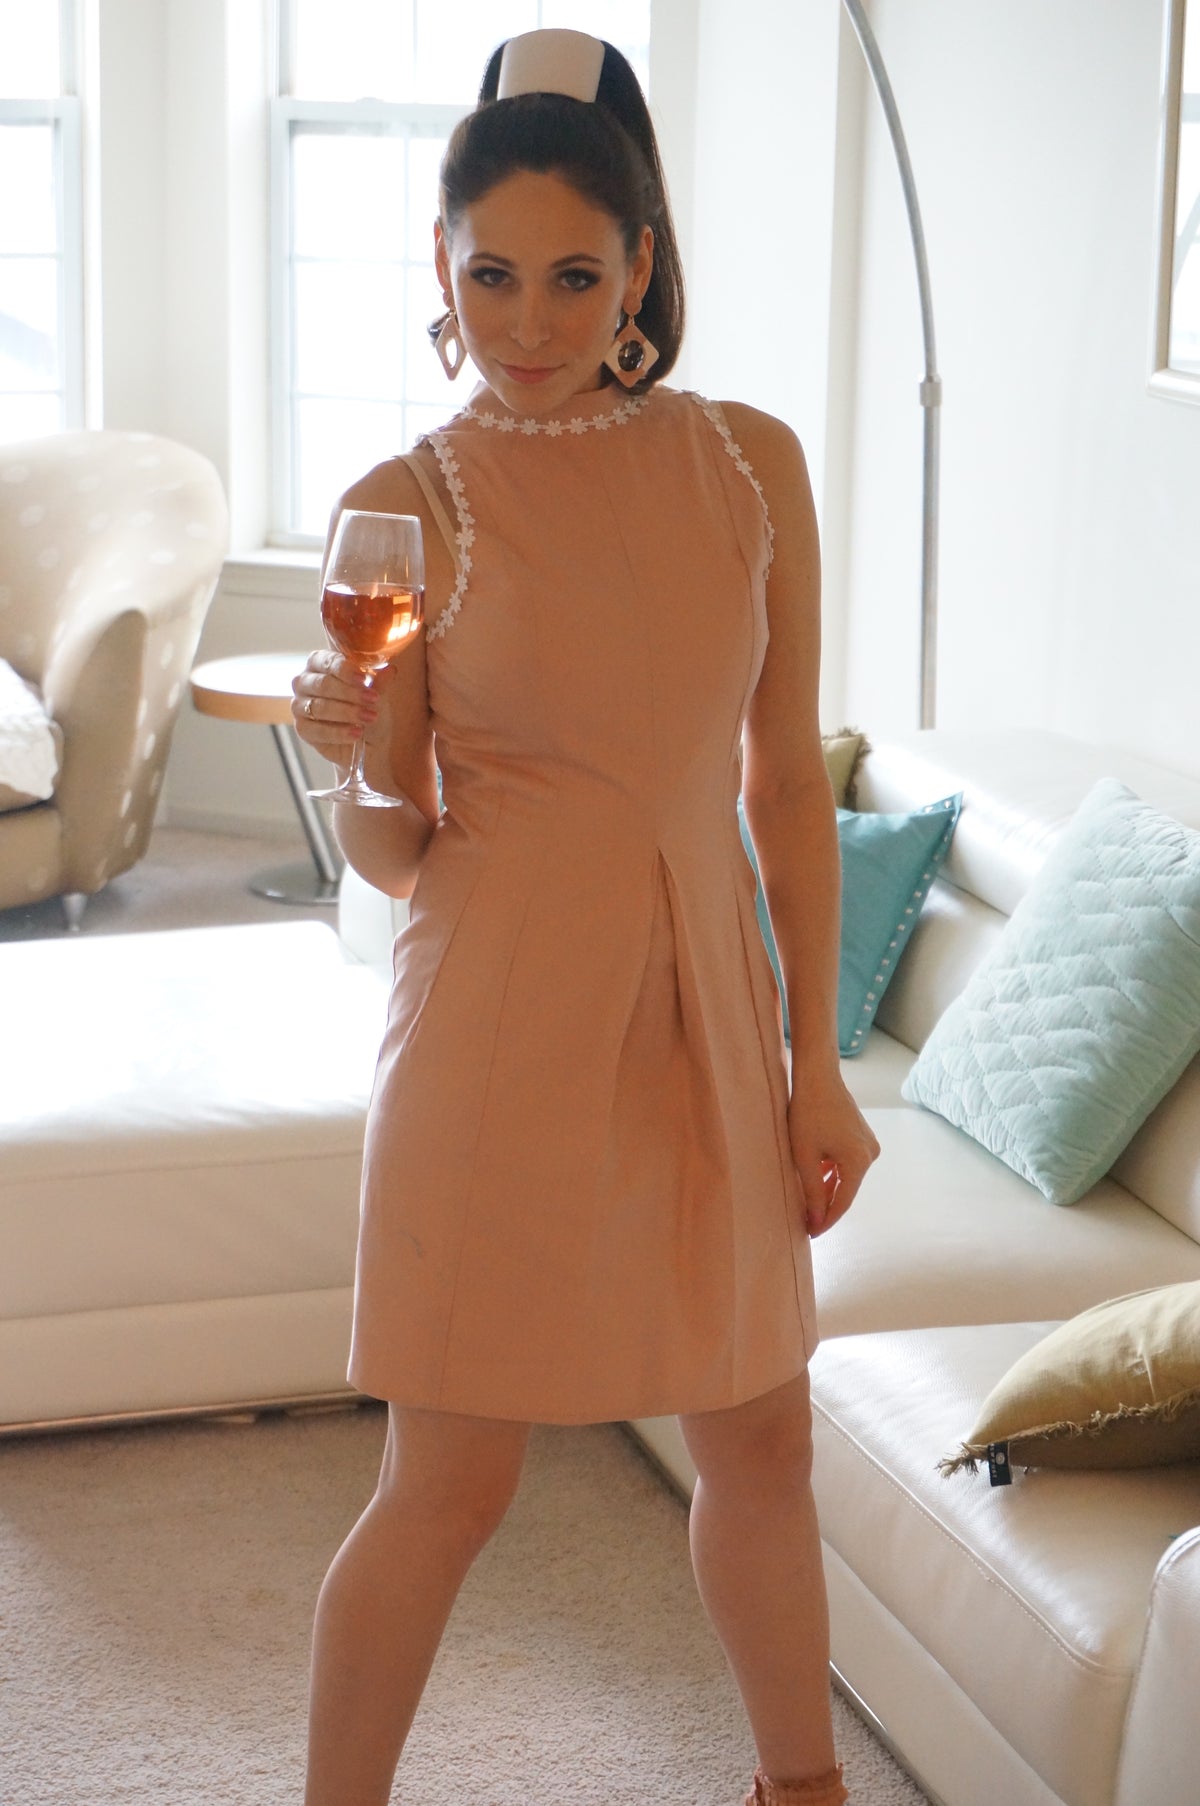  Model is wearing a pink dress with lace daisy trim and a front kick pleat looking off to the side in front of a couch holding a wineglass.